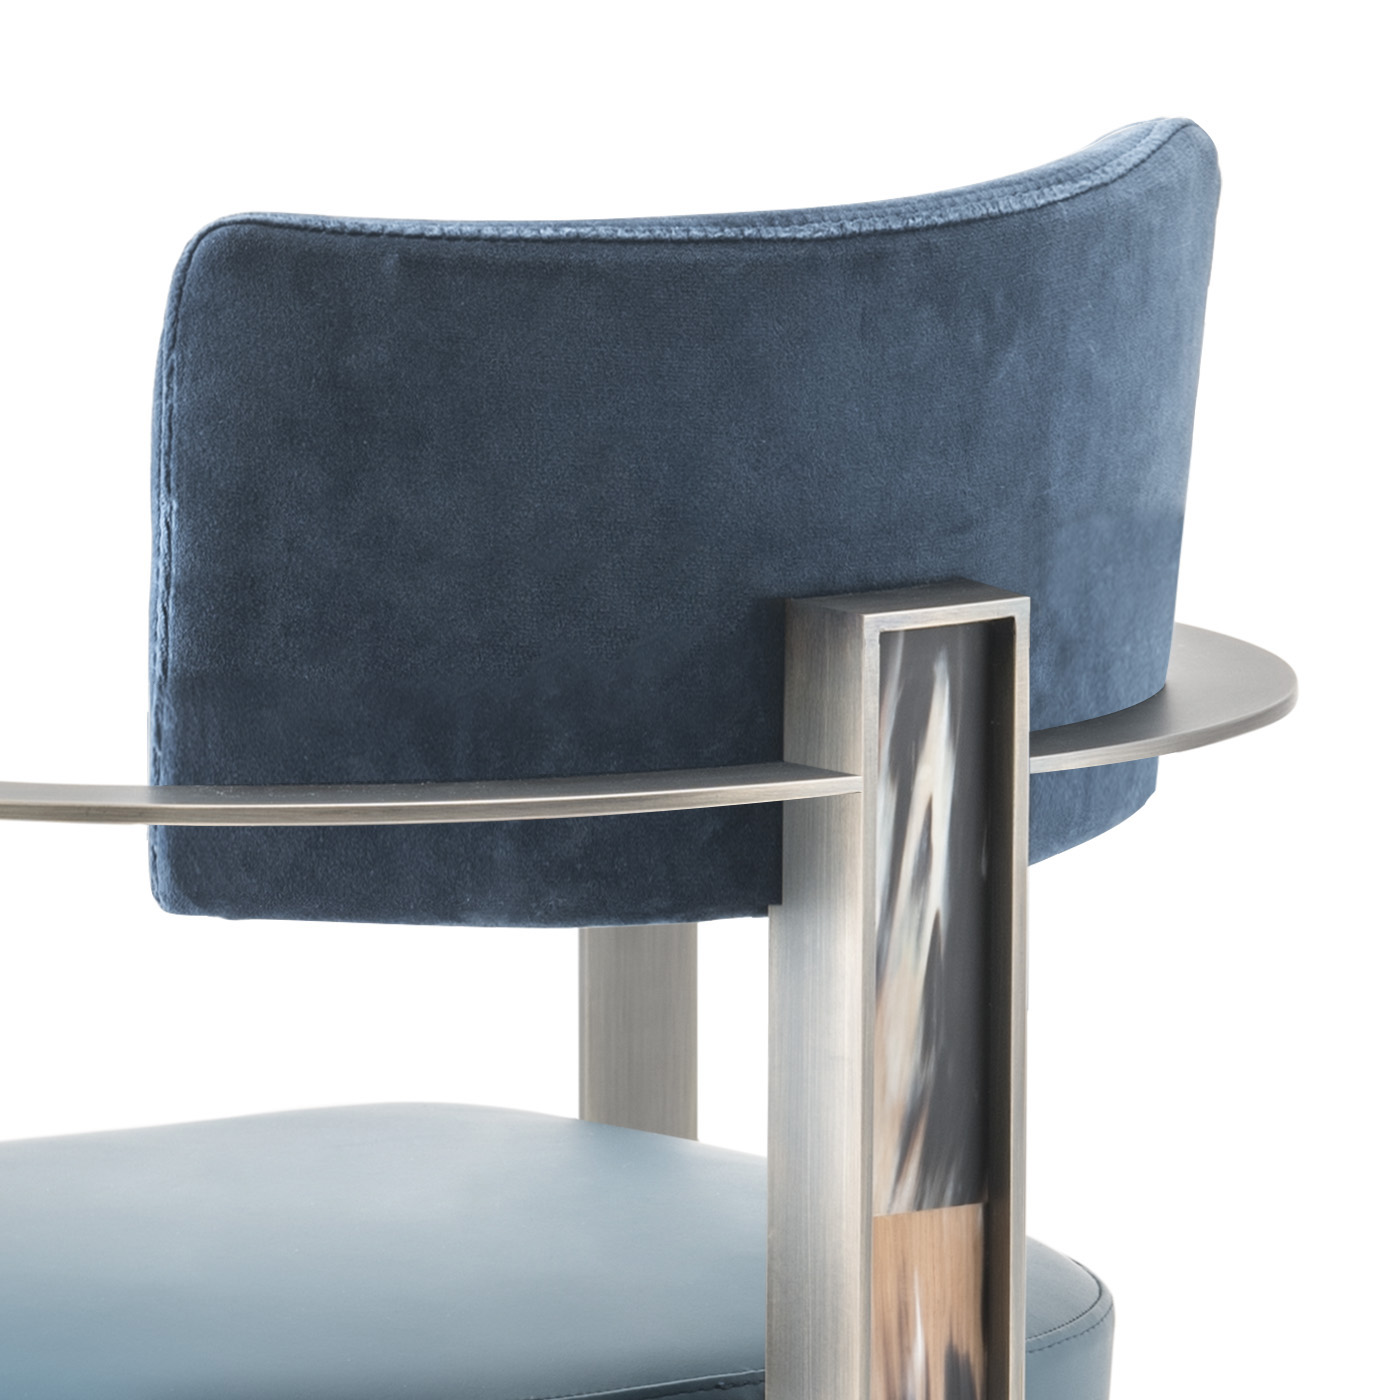 Sofas and seats - Sveva chair in leather with horn inlays 6043S - detail - Arcahorn